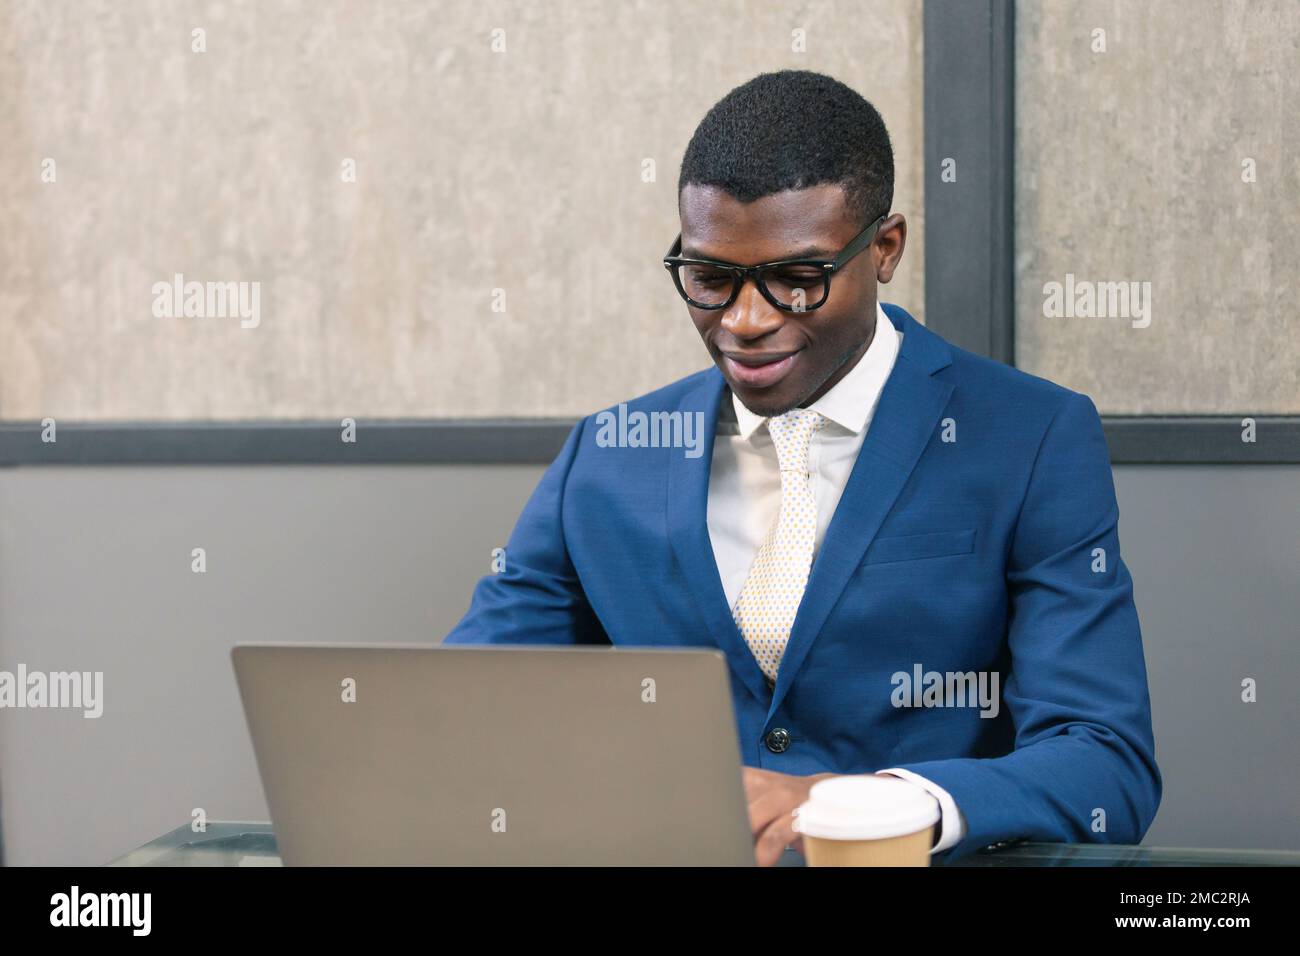 Smiling professional black business man using laptop computer working in office. Stock Photo